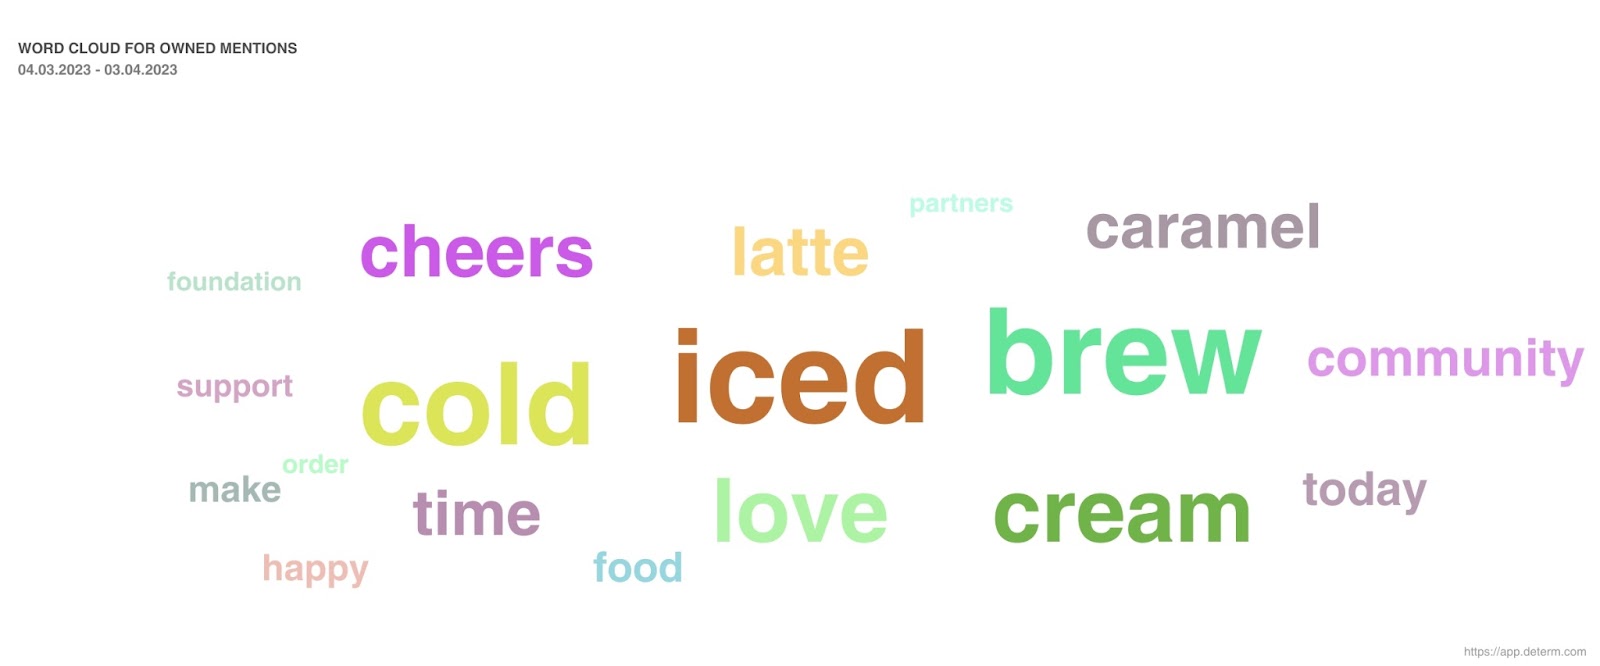 Word cloud for owned mentions for Starbucks trend analysis